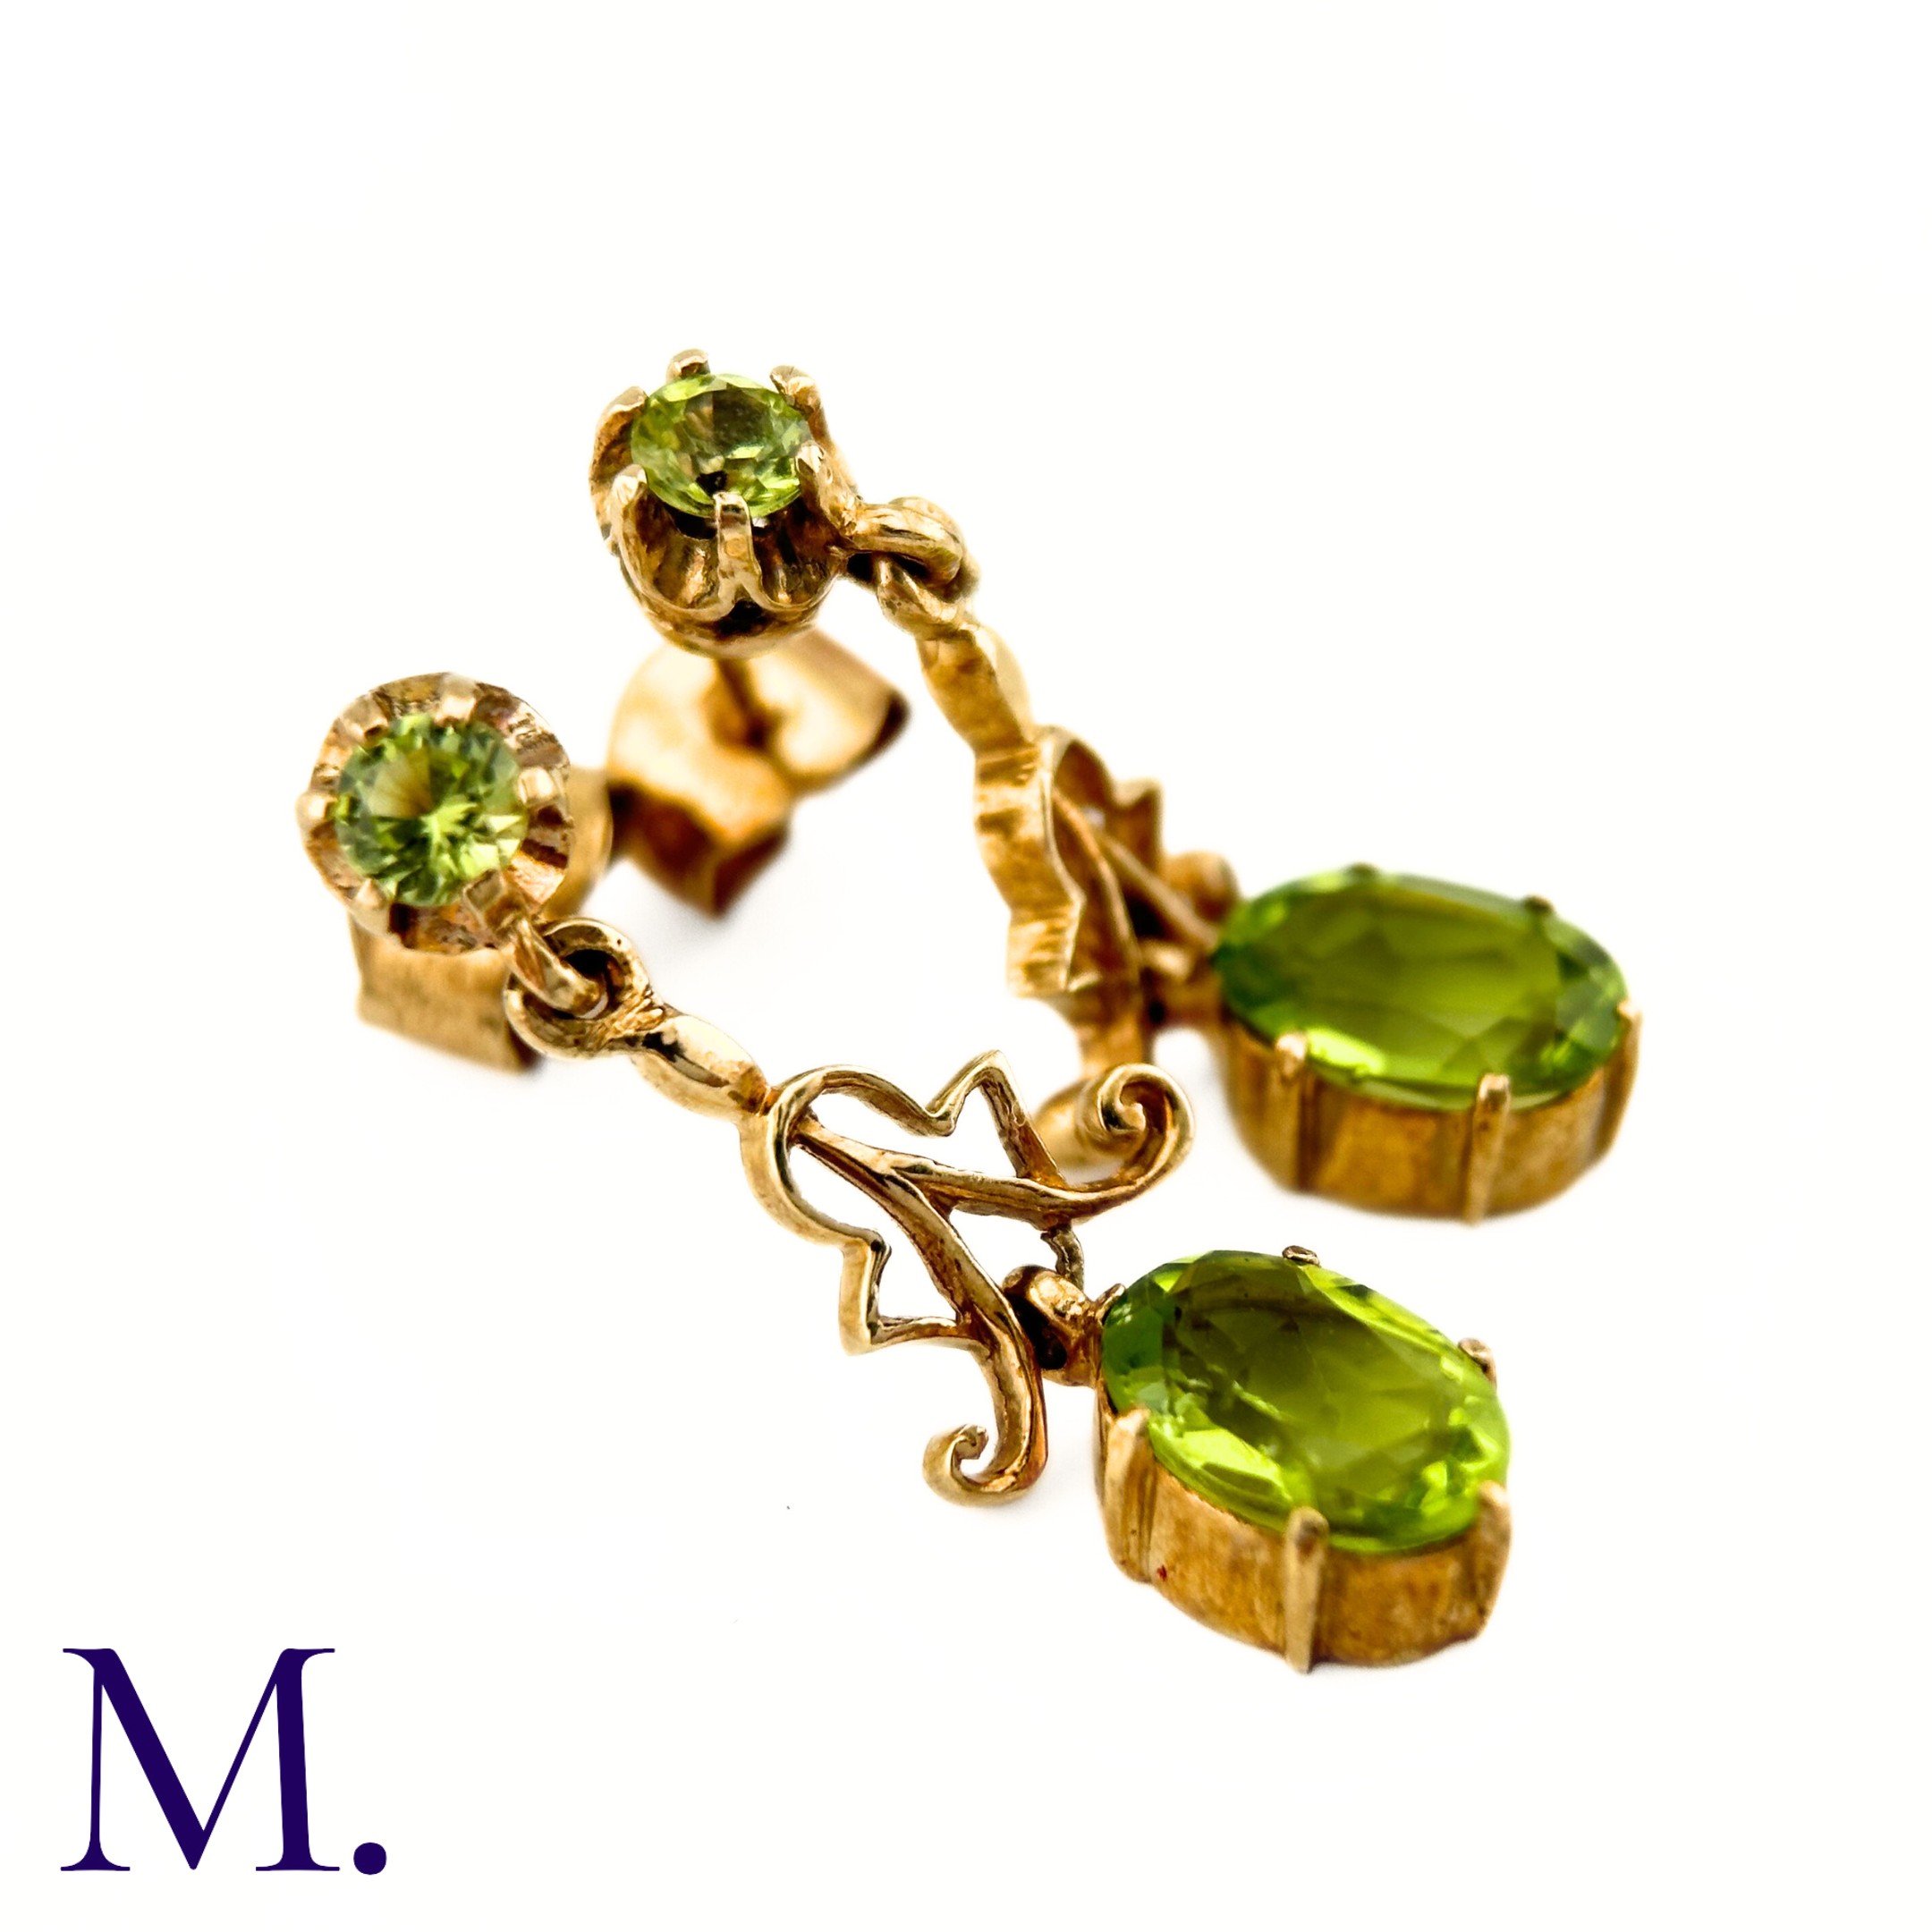 A Pair of Antique Peridot Earrings The peridot earrings are set in 9ct yellow gold. The earrings are - Image 4 of 4